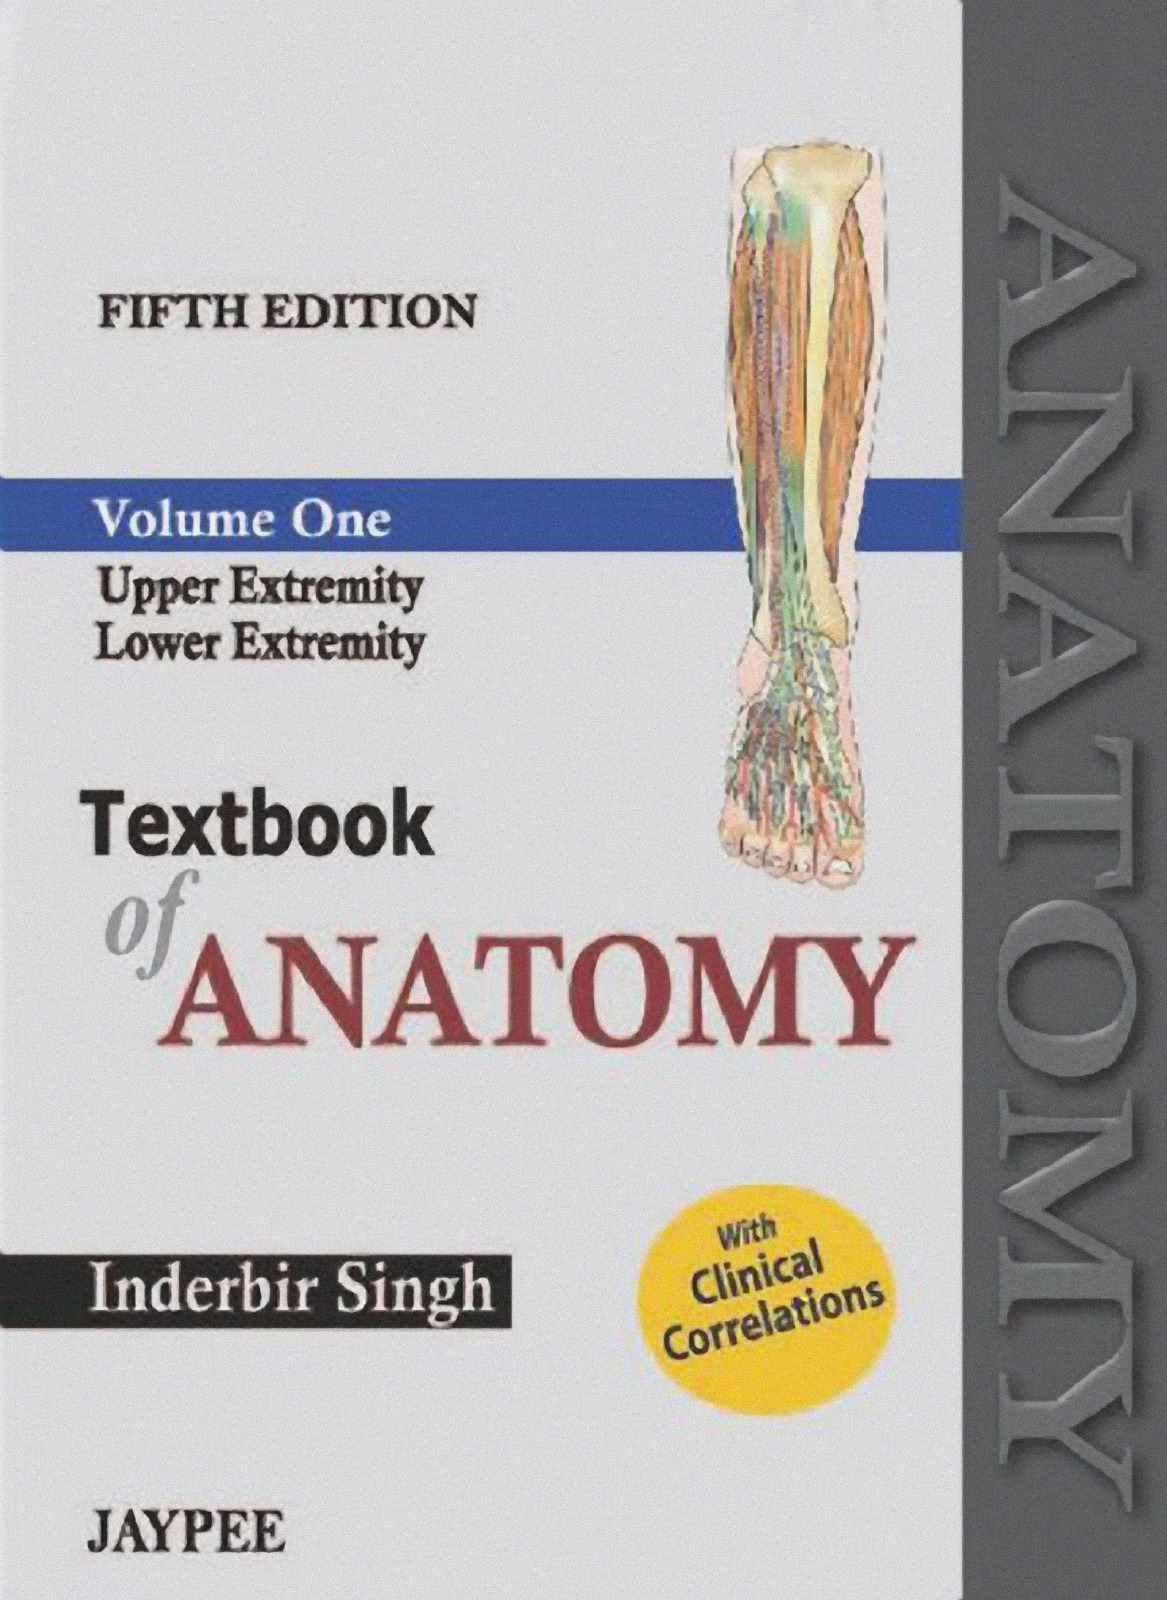 inderbir singh’s textbook of anatomy fifth edition volume one pdf book free download